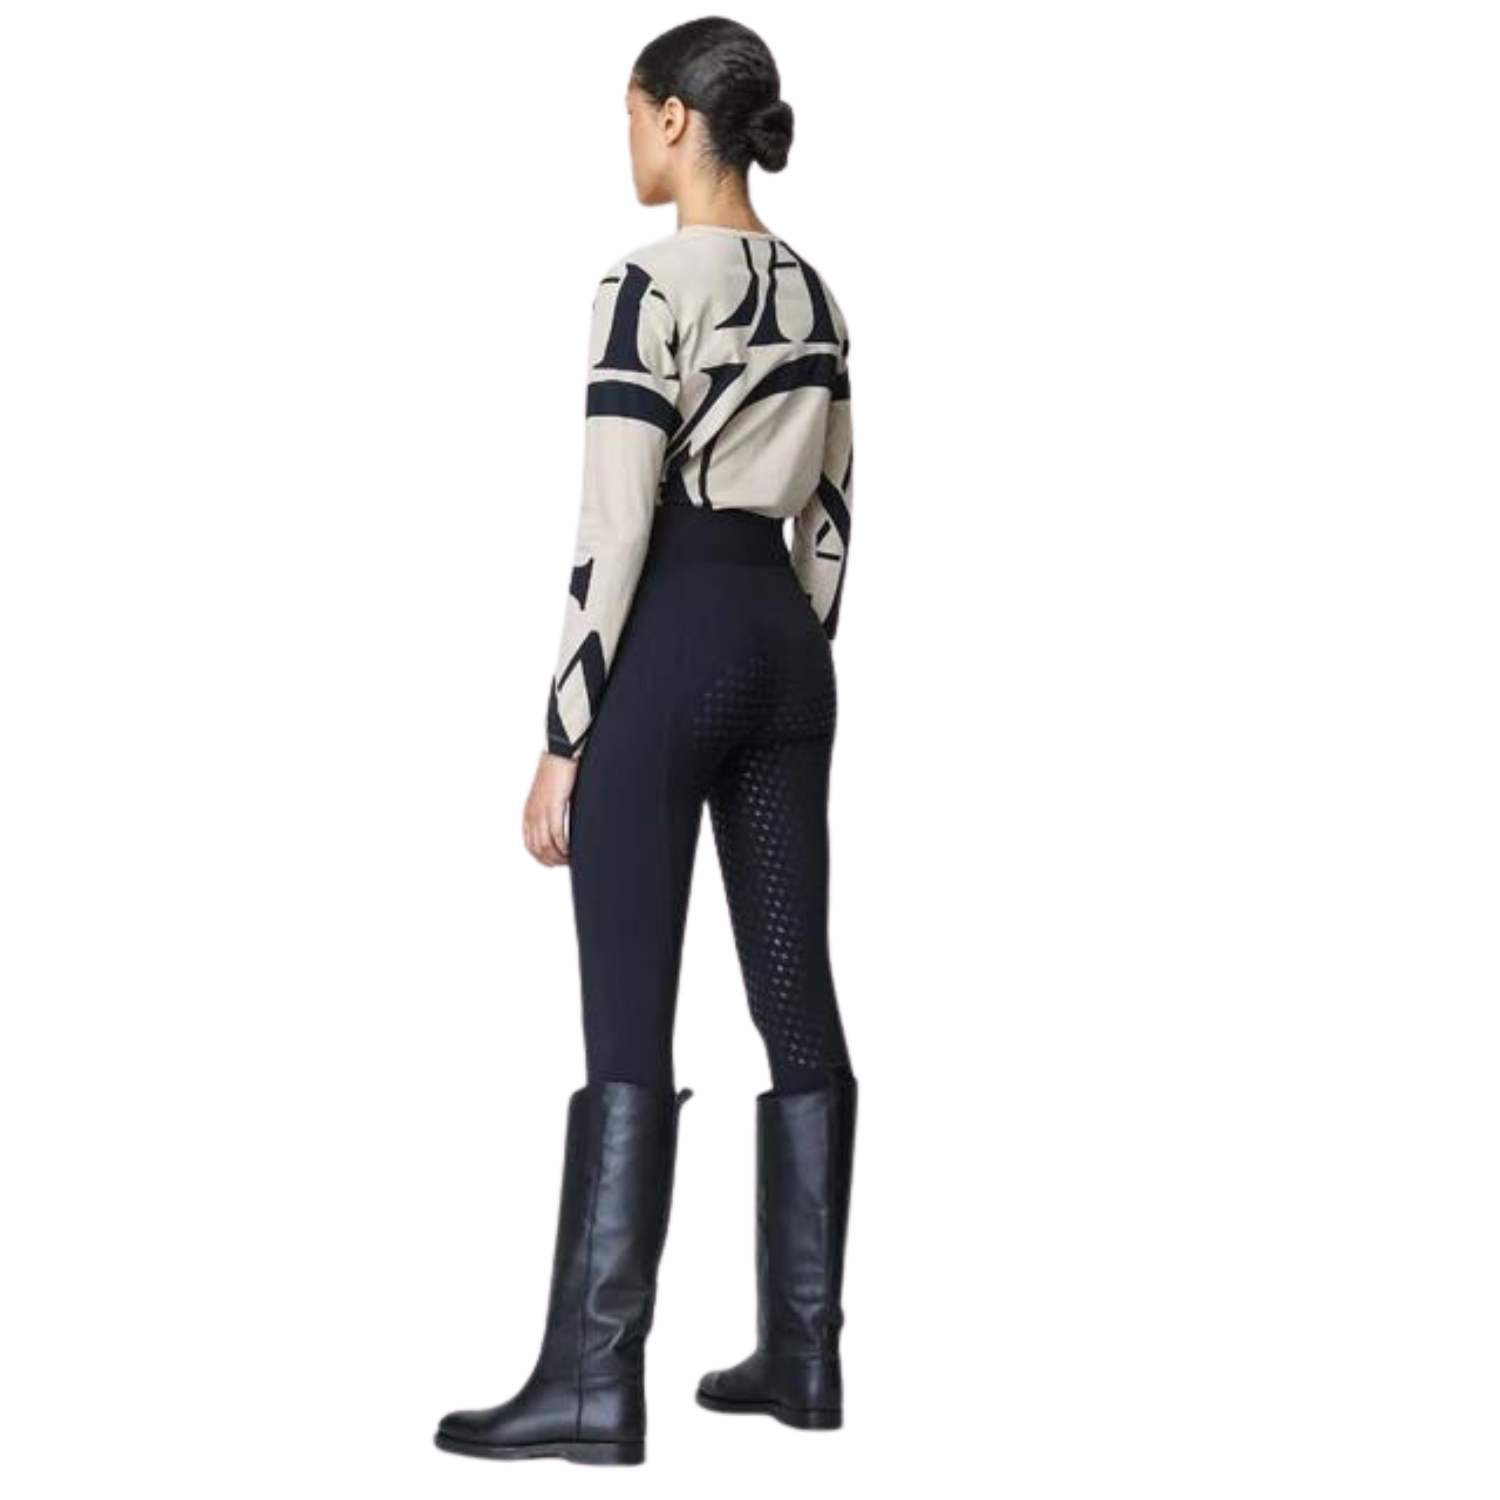 Ladies Compression Pull-On Knee Grip Breeches - Black